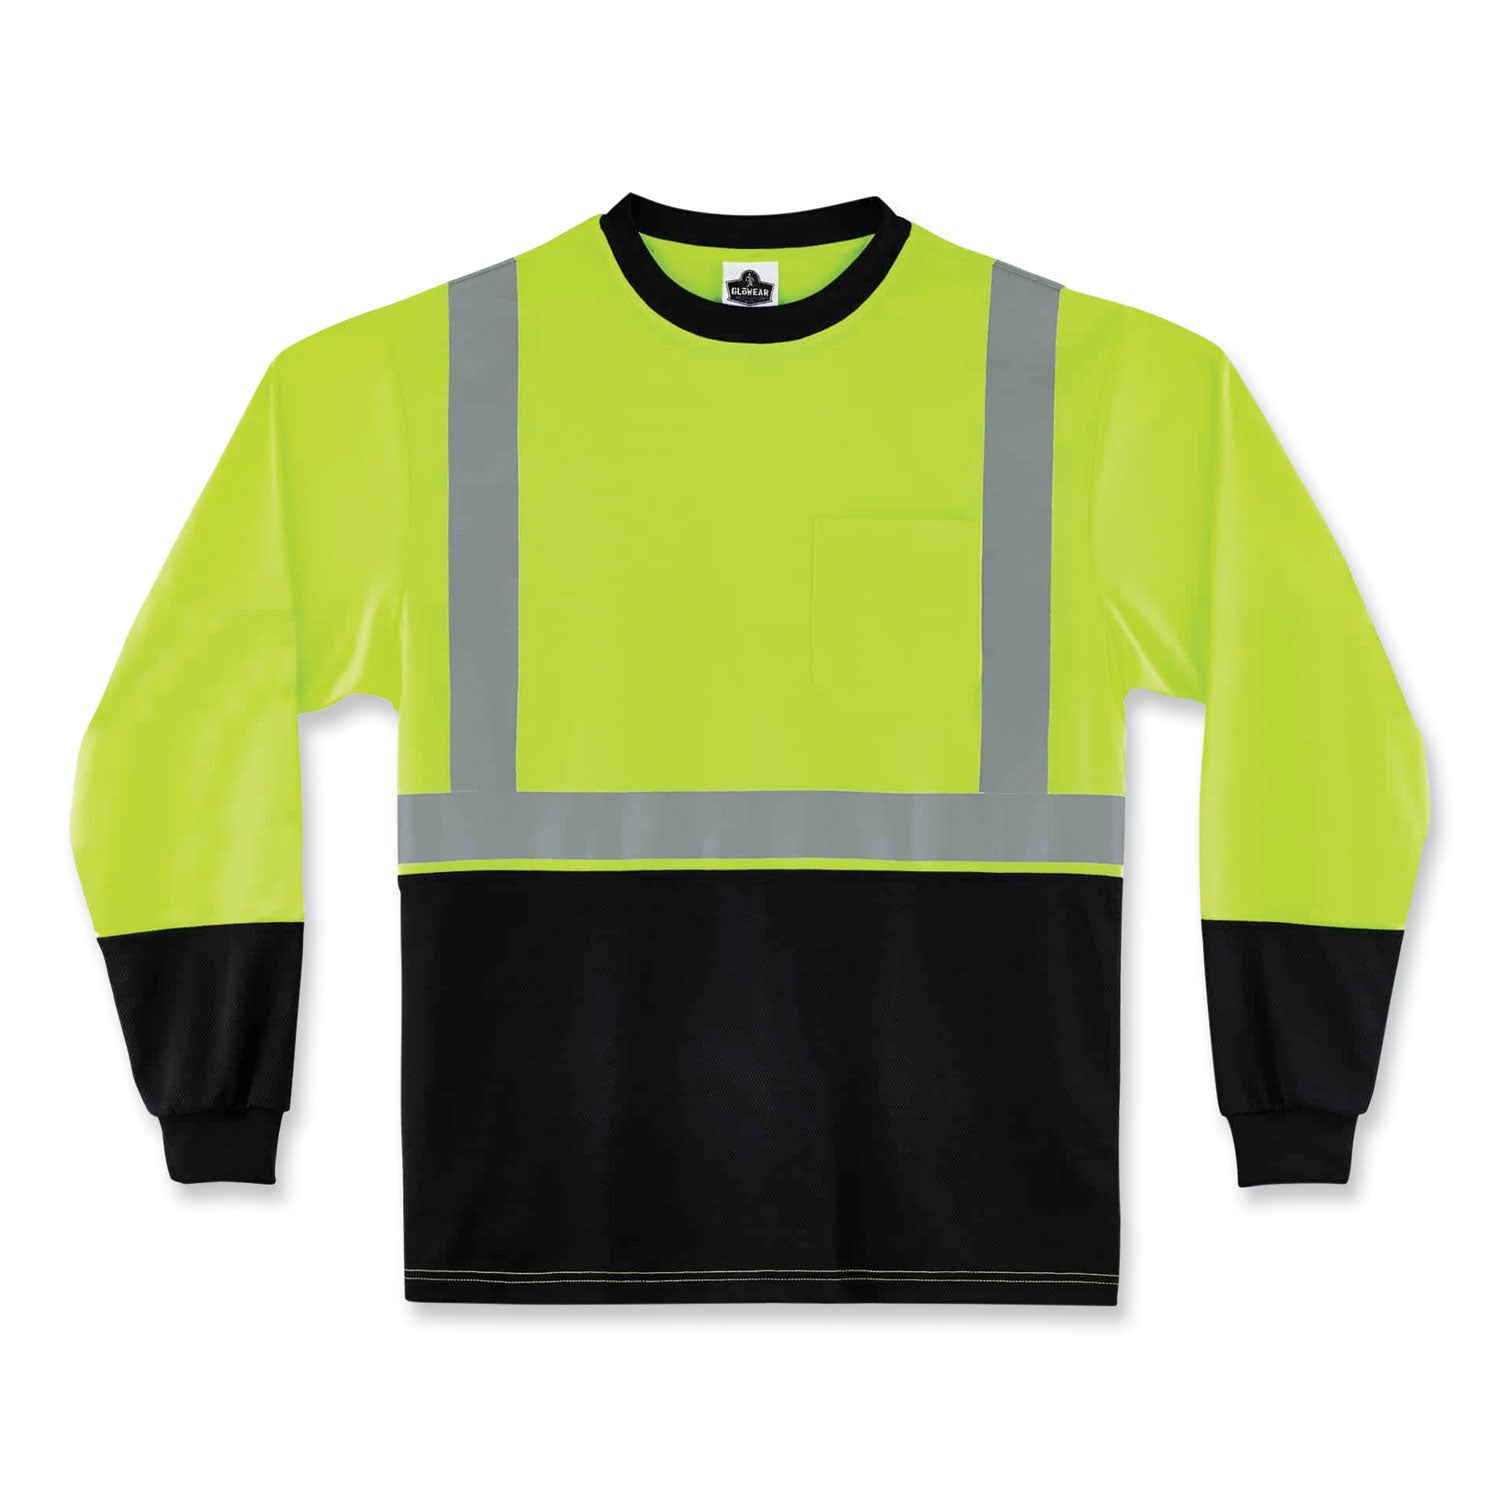 glowear-8291bk-type-r-class-2-black-front-long-sleeve-t-shirt-polyester-2x-large-lime-ships-in-1-3-business-days_ego22706 - 1